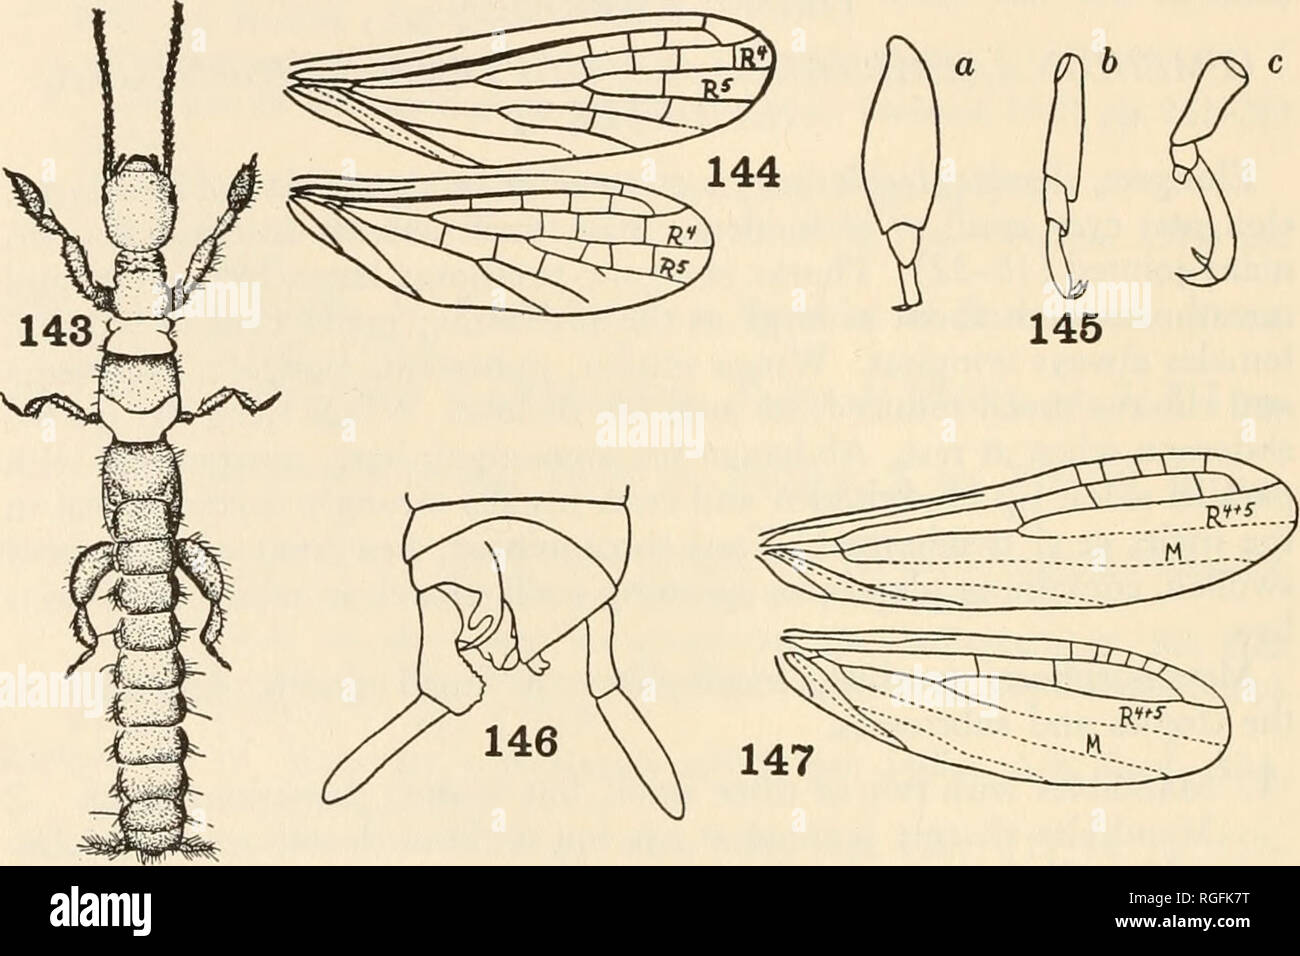 . Bulletin of the Museum of Comparative Zoology at Harvard College. Zoology. 120 bulletin: museum of comparative zoology Left cercus one-jointed in adult male, with no distinct second joint. (Notoligotoma, Austr.; Ptilocerembia, Mai.) NOTOLIGOT6MID^E Wings with well developed venation; anterior branch of the cubitus forked; abdominal terminalia nearly symmetrical; comparatively large species (15—18 mm. in length). (Clothoda, Neotrop.) CLOTHODIDiE Wings with poorly developed venation, only the first three branches of the radius and one cubital vein distinct; abdominal terminalia strongly asymme Stock Photo